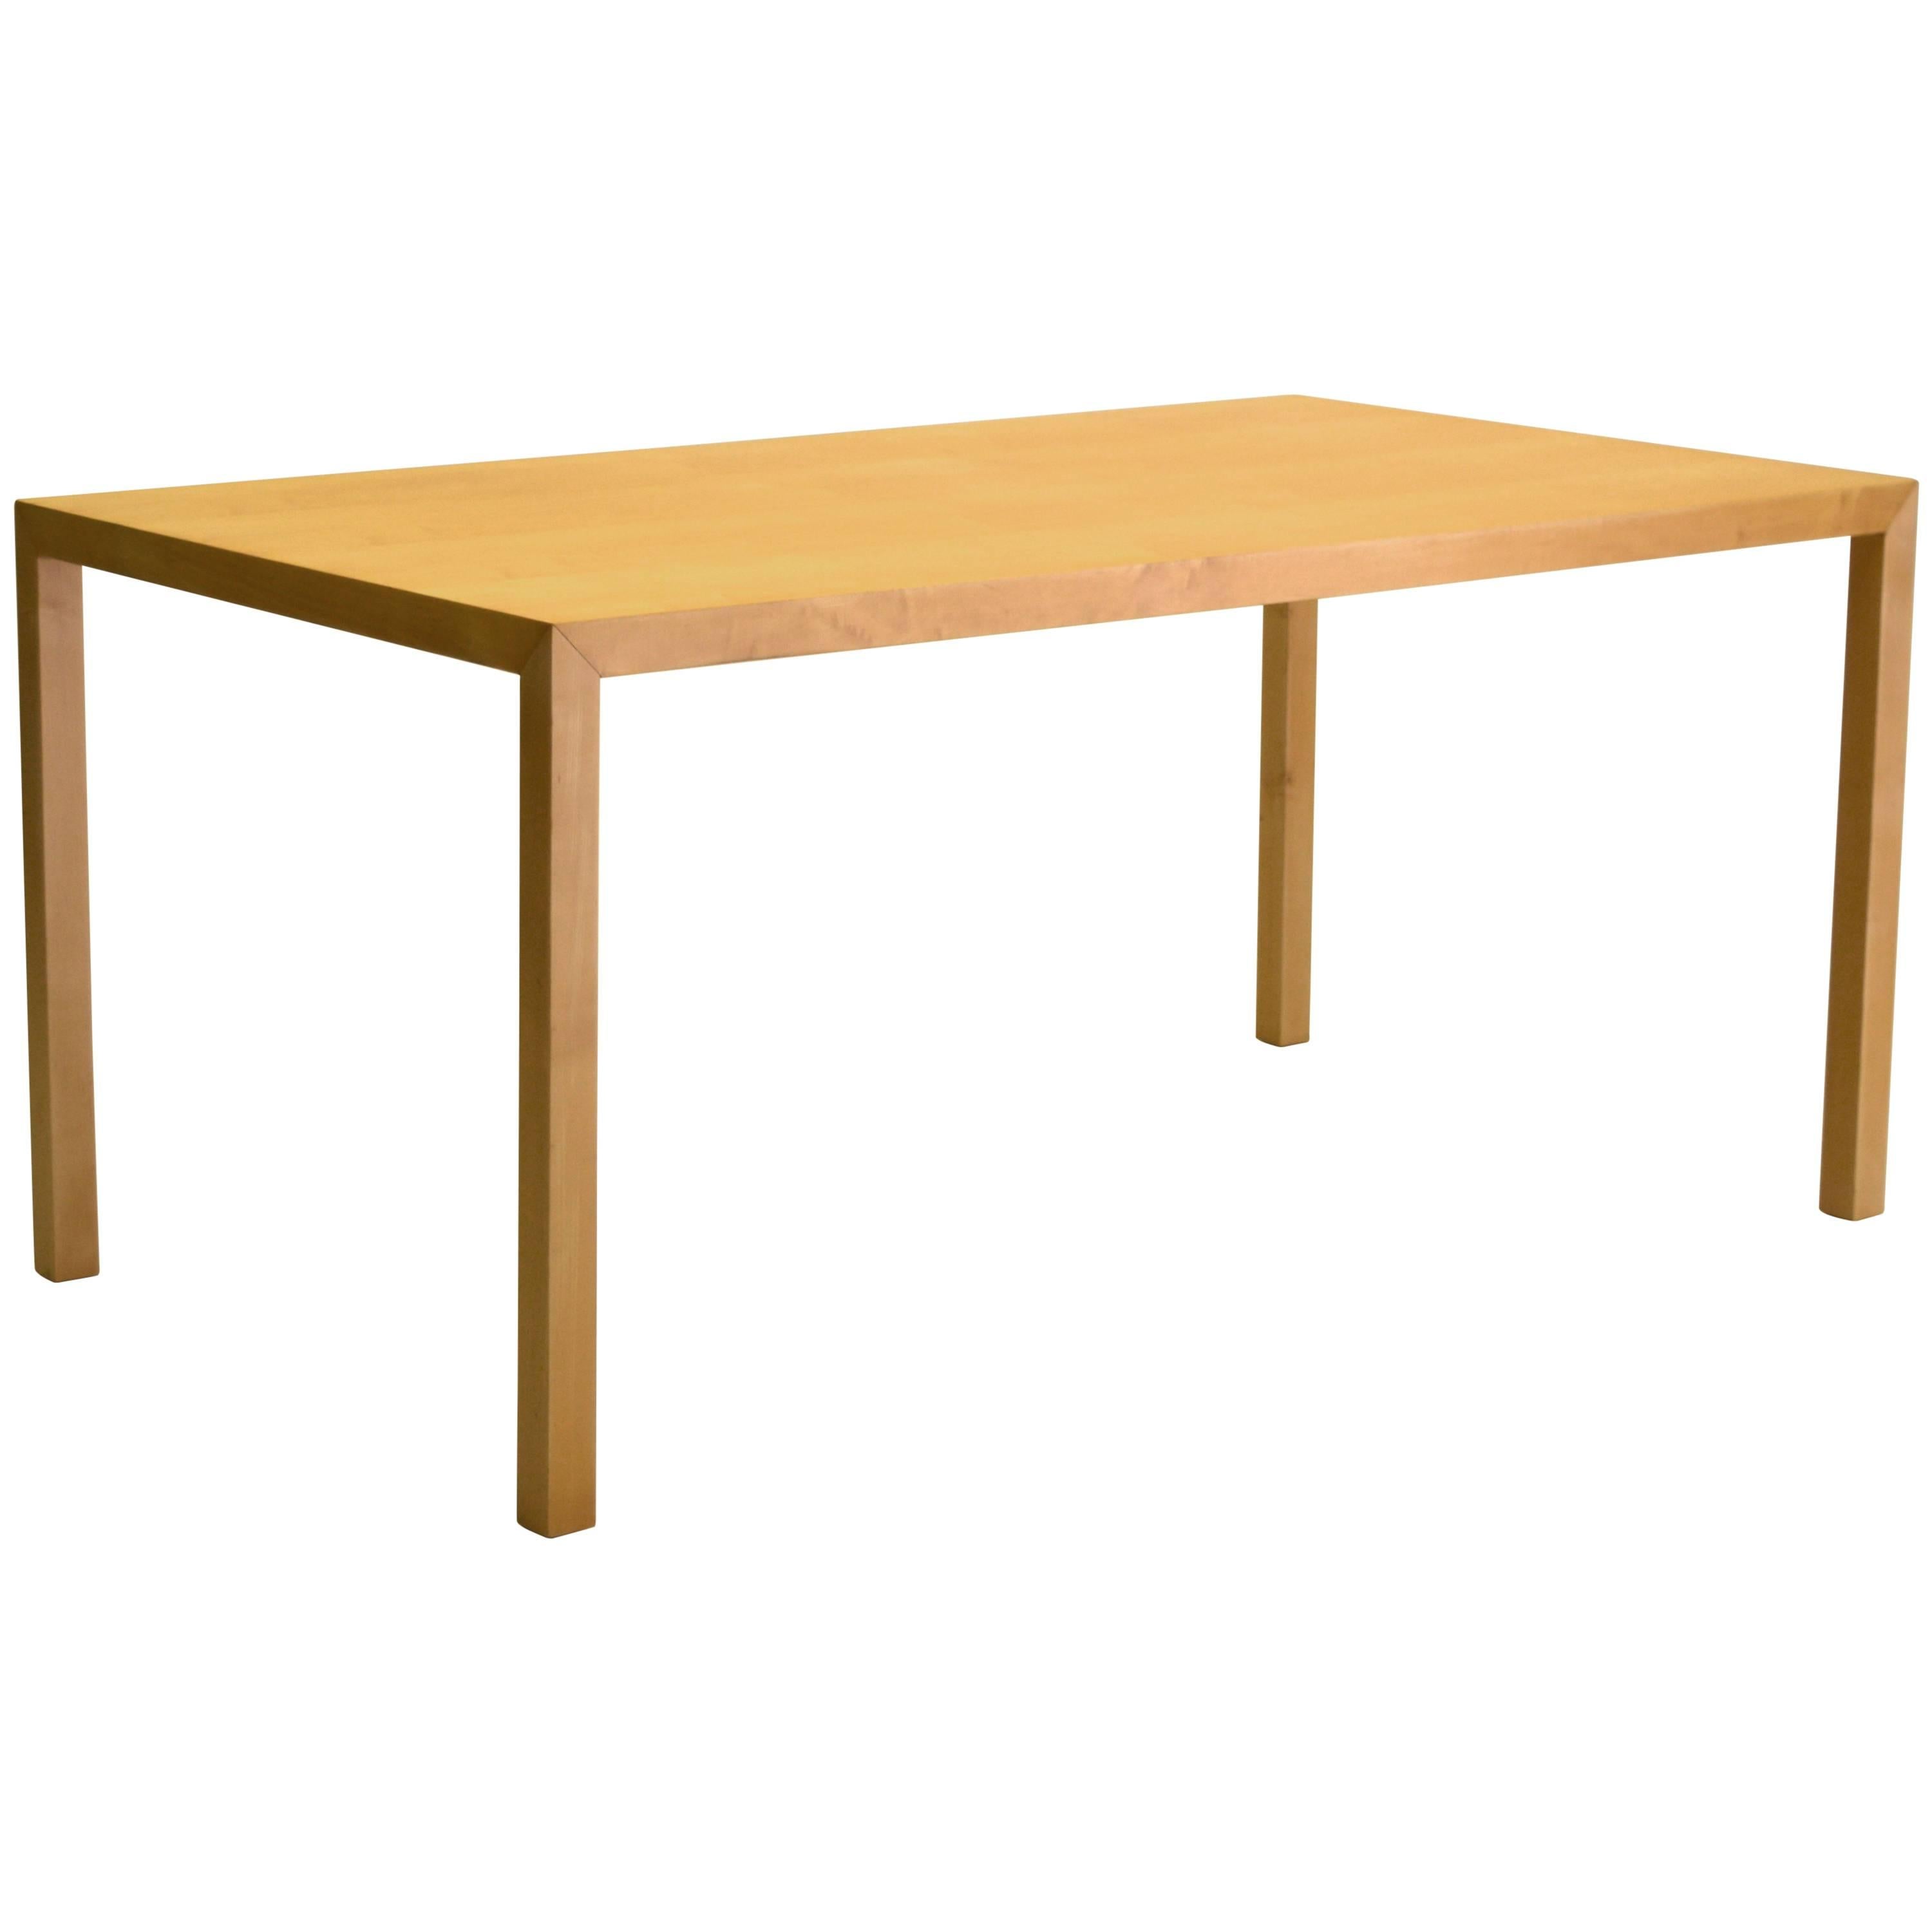 Early Maple Dining Table by Founders